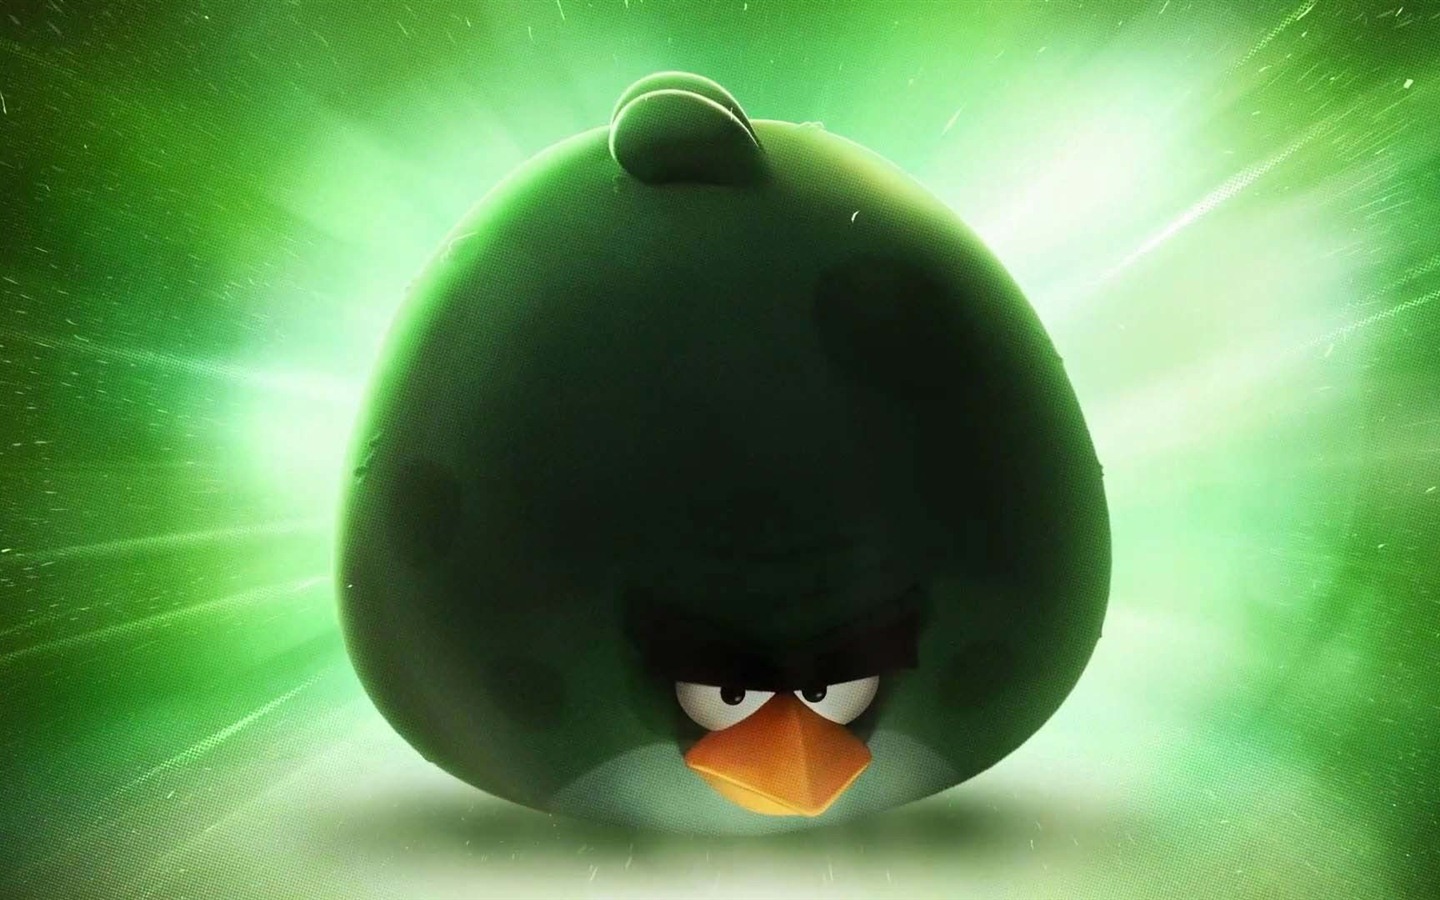 Angry Birds Game Wallpapers #14 - 1440x900